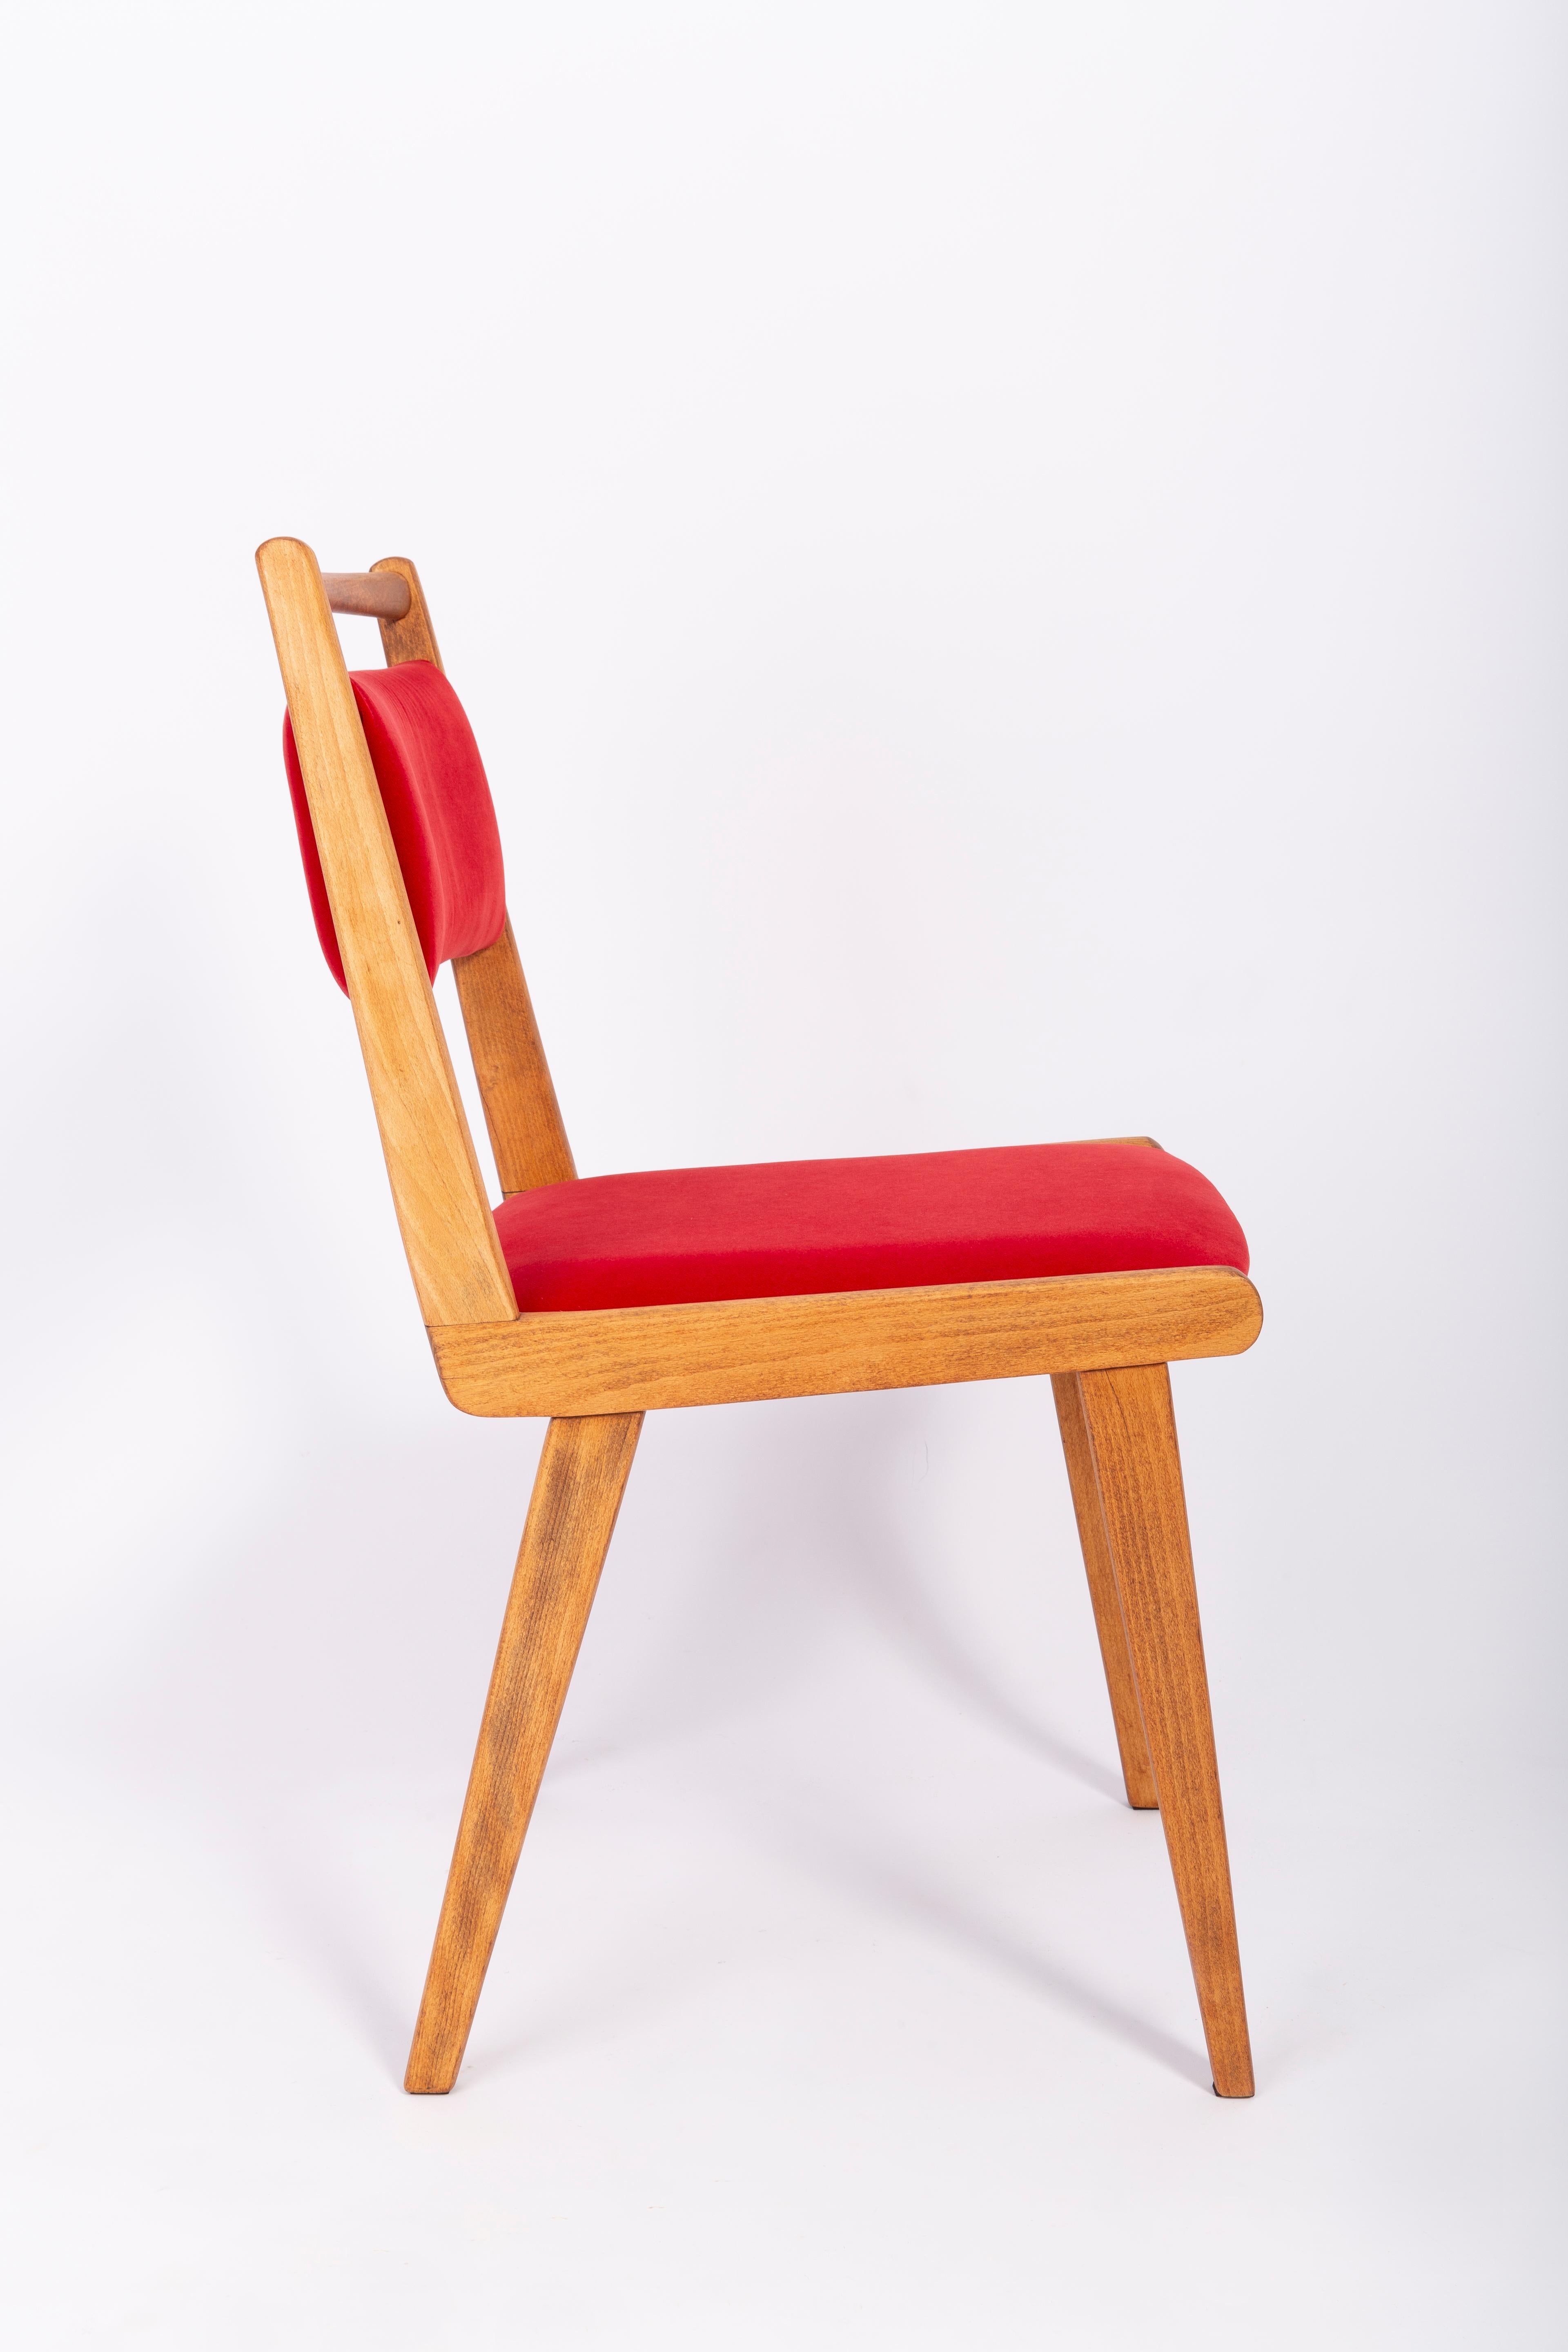 Hand-Crafted Set of Four 20th Century Red Velvet Chairs, by Rajmund Halas, Poland, 1960s For Sale